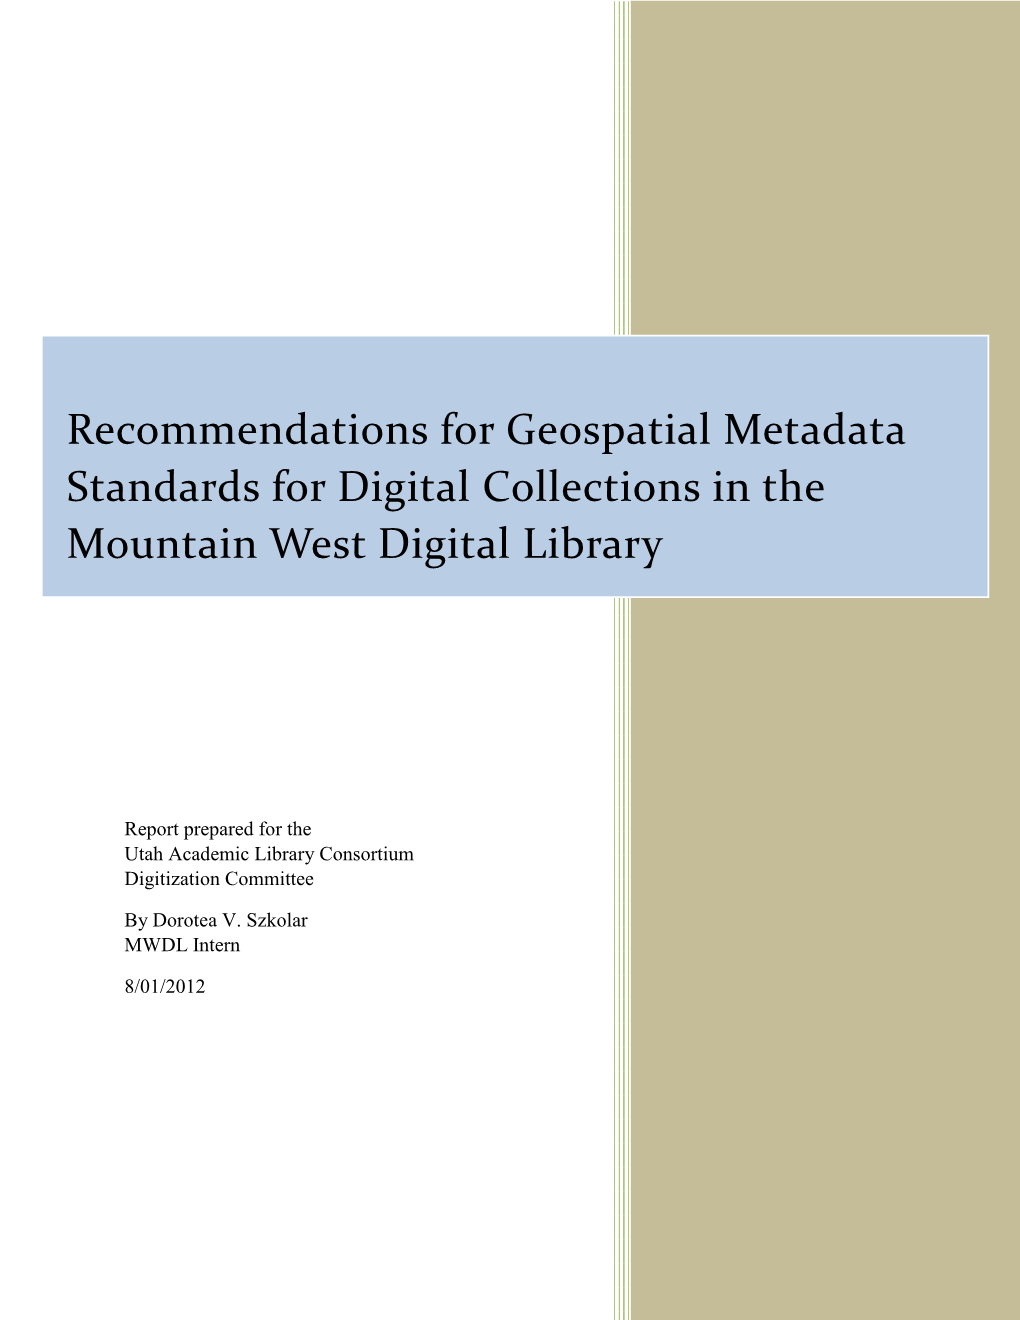 Recommendations for Geospatial Metadata Standards for Digital Collections in the Mountain West Digital Library